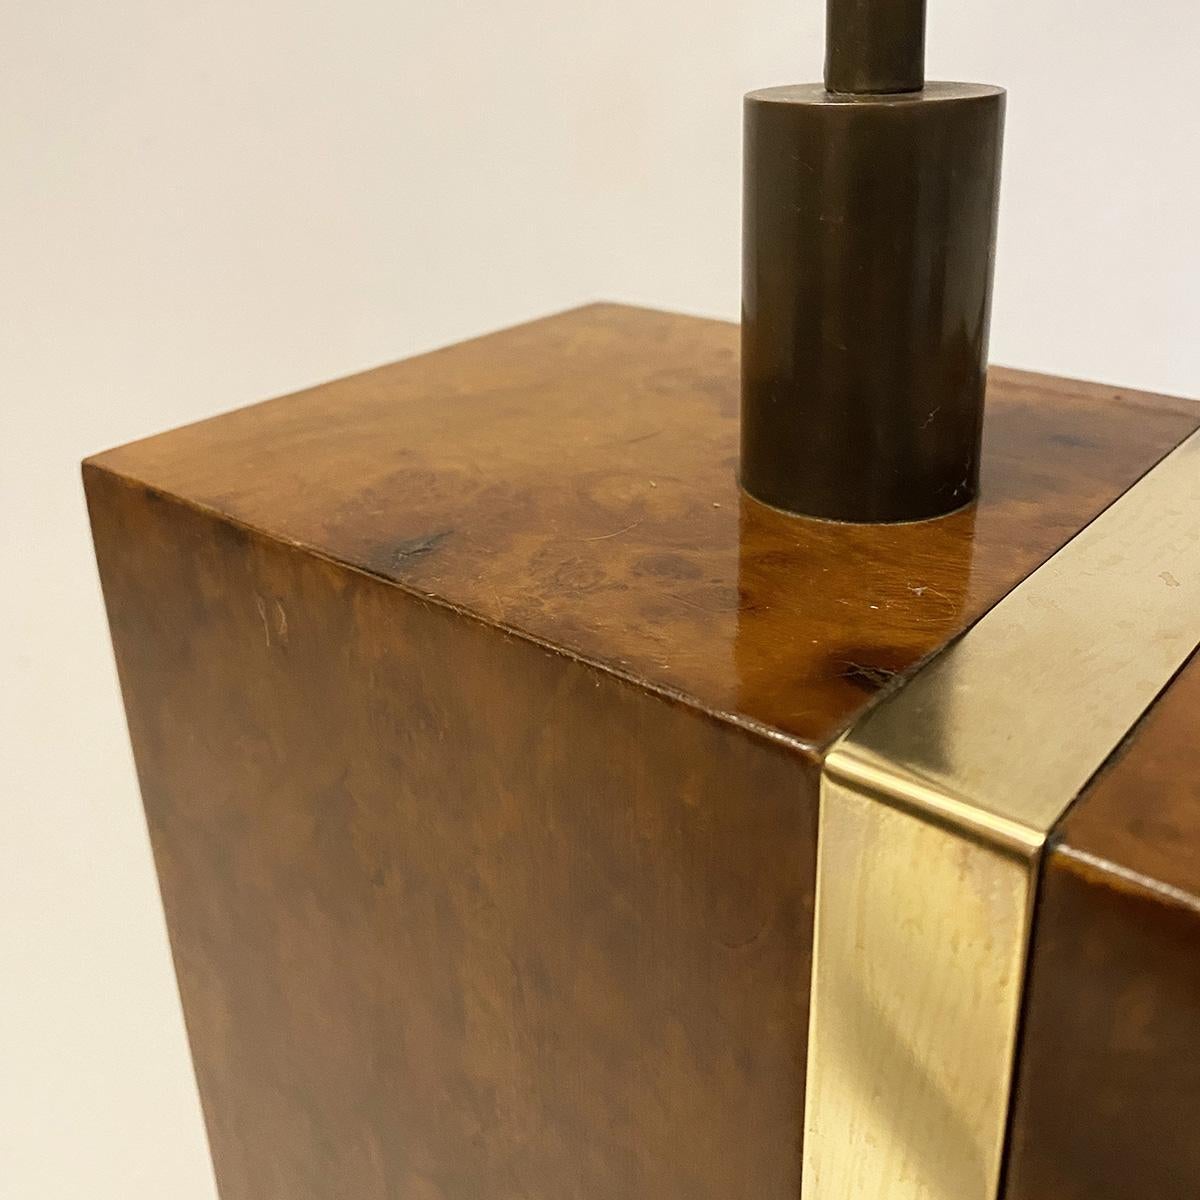 Modernist Lamp in Thuya Burl Wood and Brass, in the Style of Willy Rizzo, 1970s For Sale 1